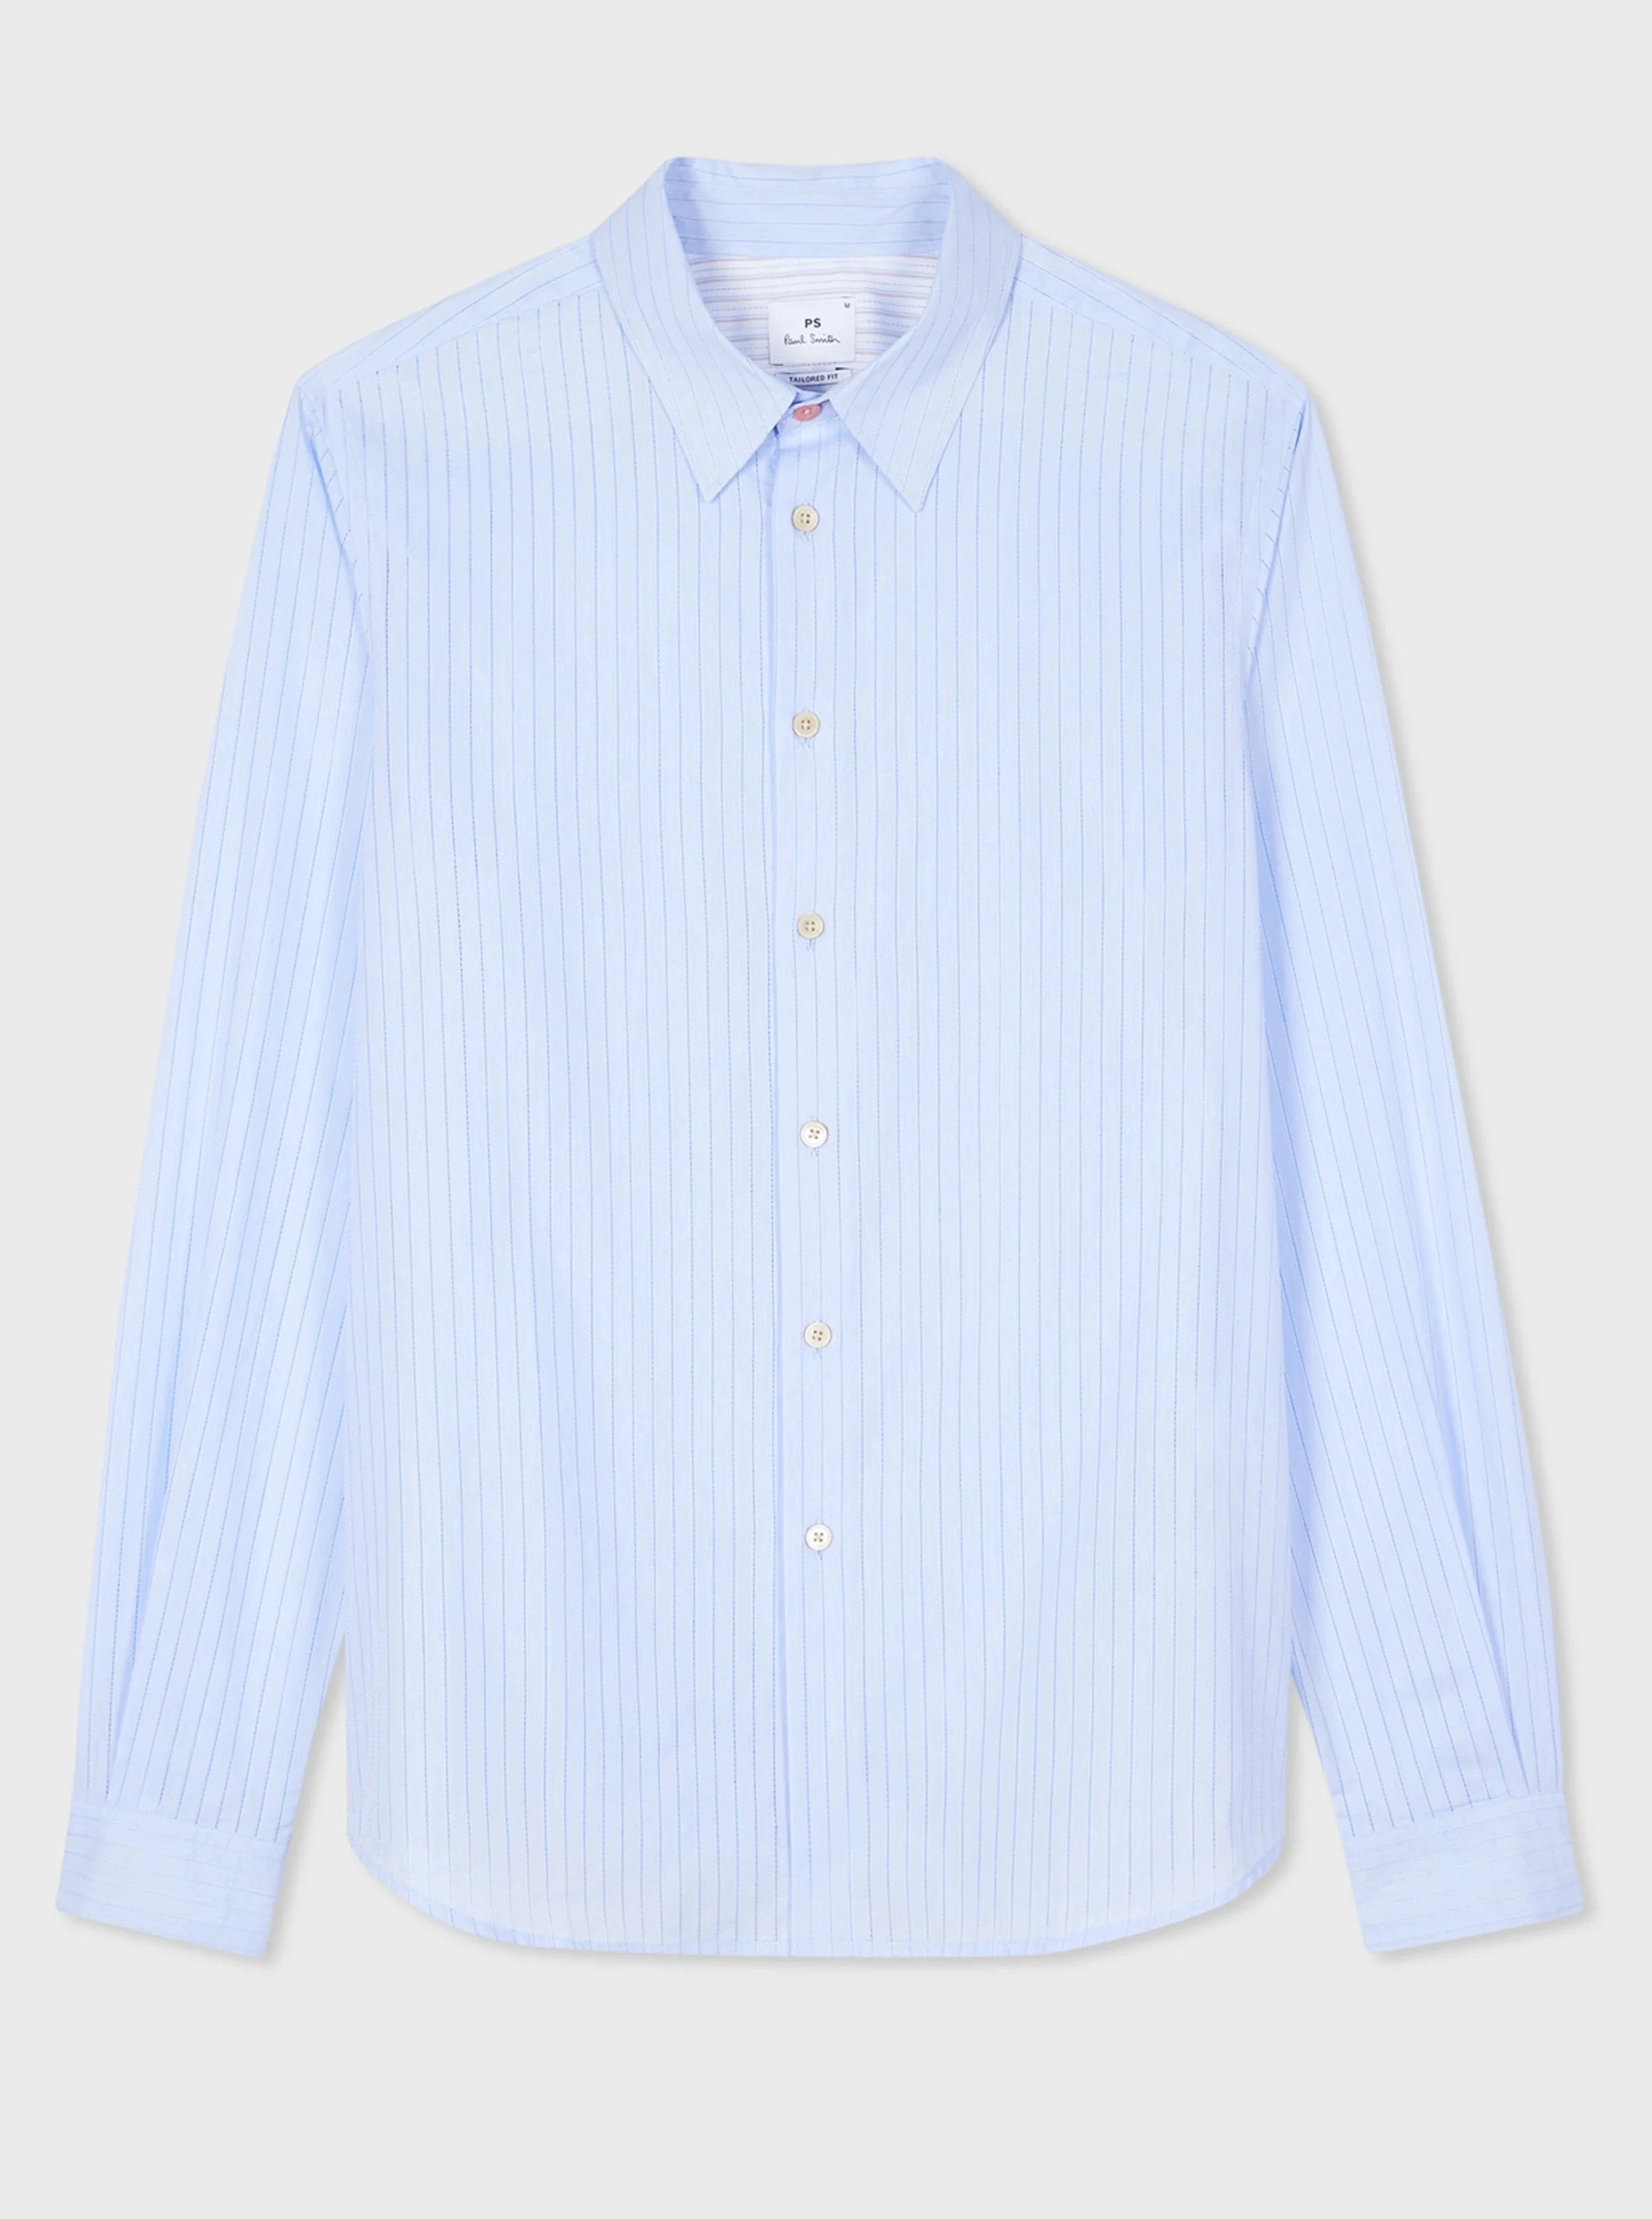 Paul Smith Perforated Stripe Shirt